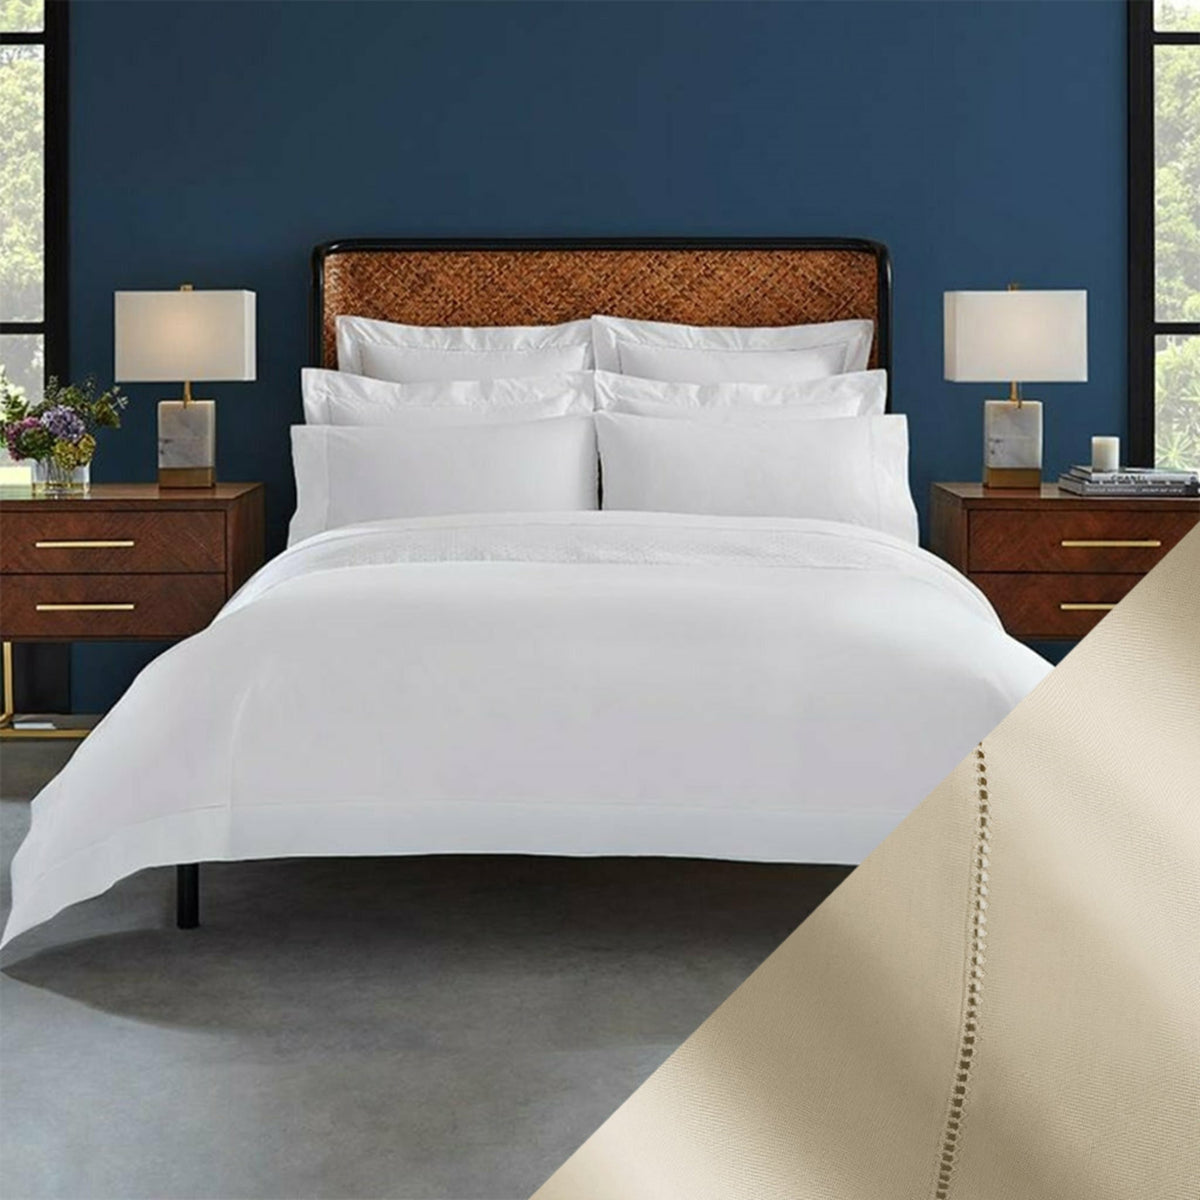 Bed Dressed in Sferra Celeste Bedding Collection with Swatch in Color Sand